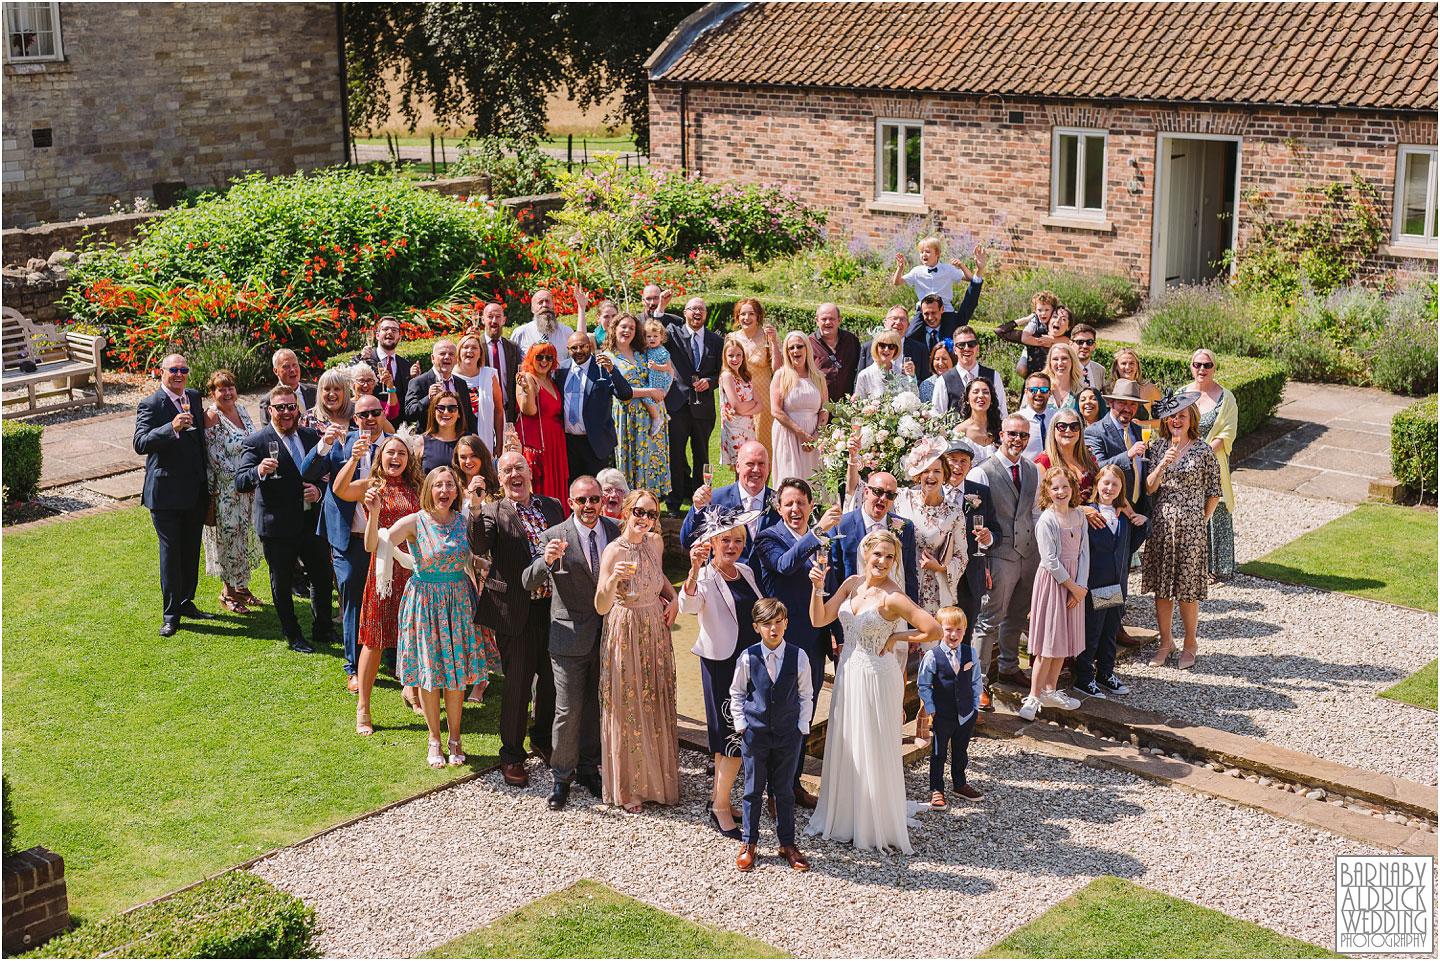 A photo of everyone at Priory Cottages in Yorkshire, Wedding photos at Priory Cottages, Wedding at The Priory Yorkshire